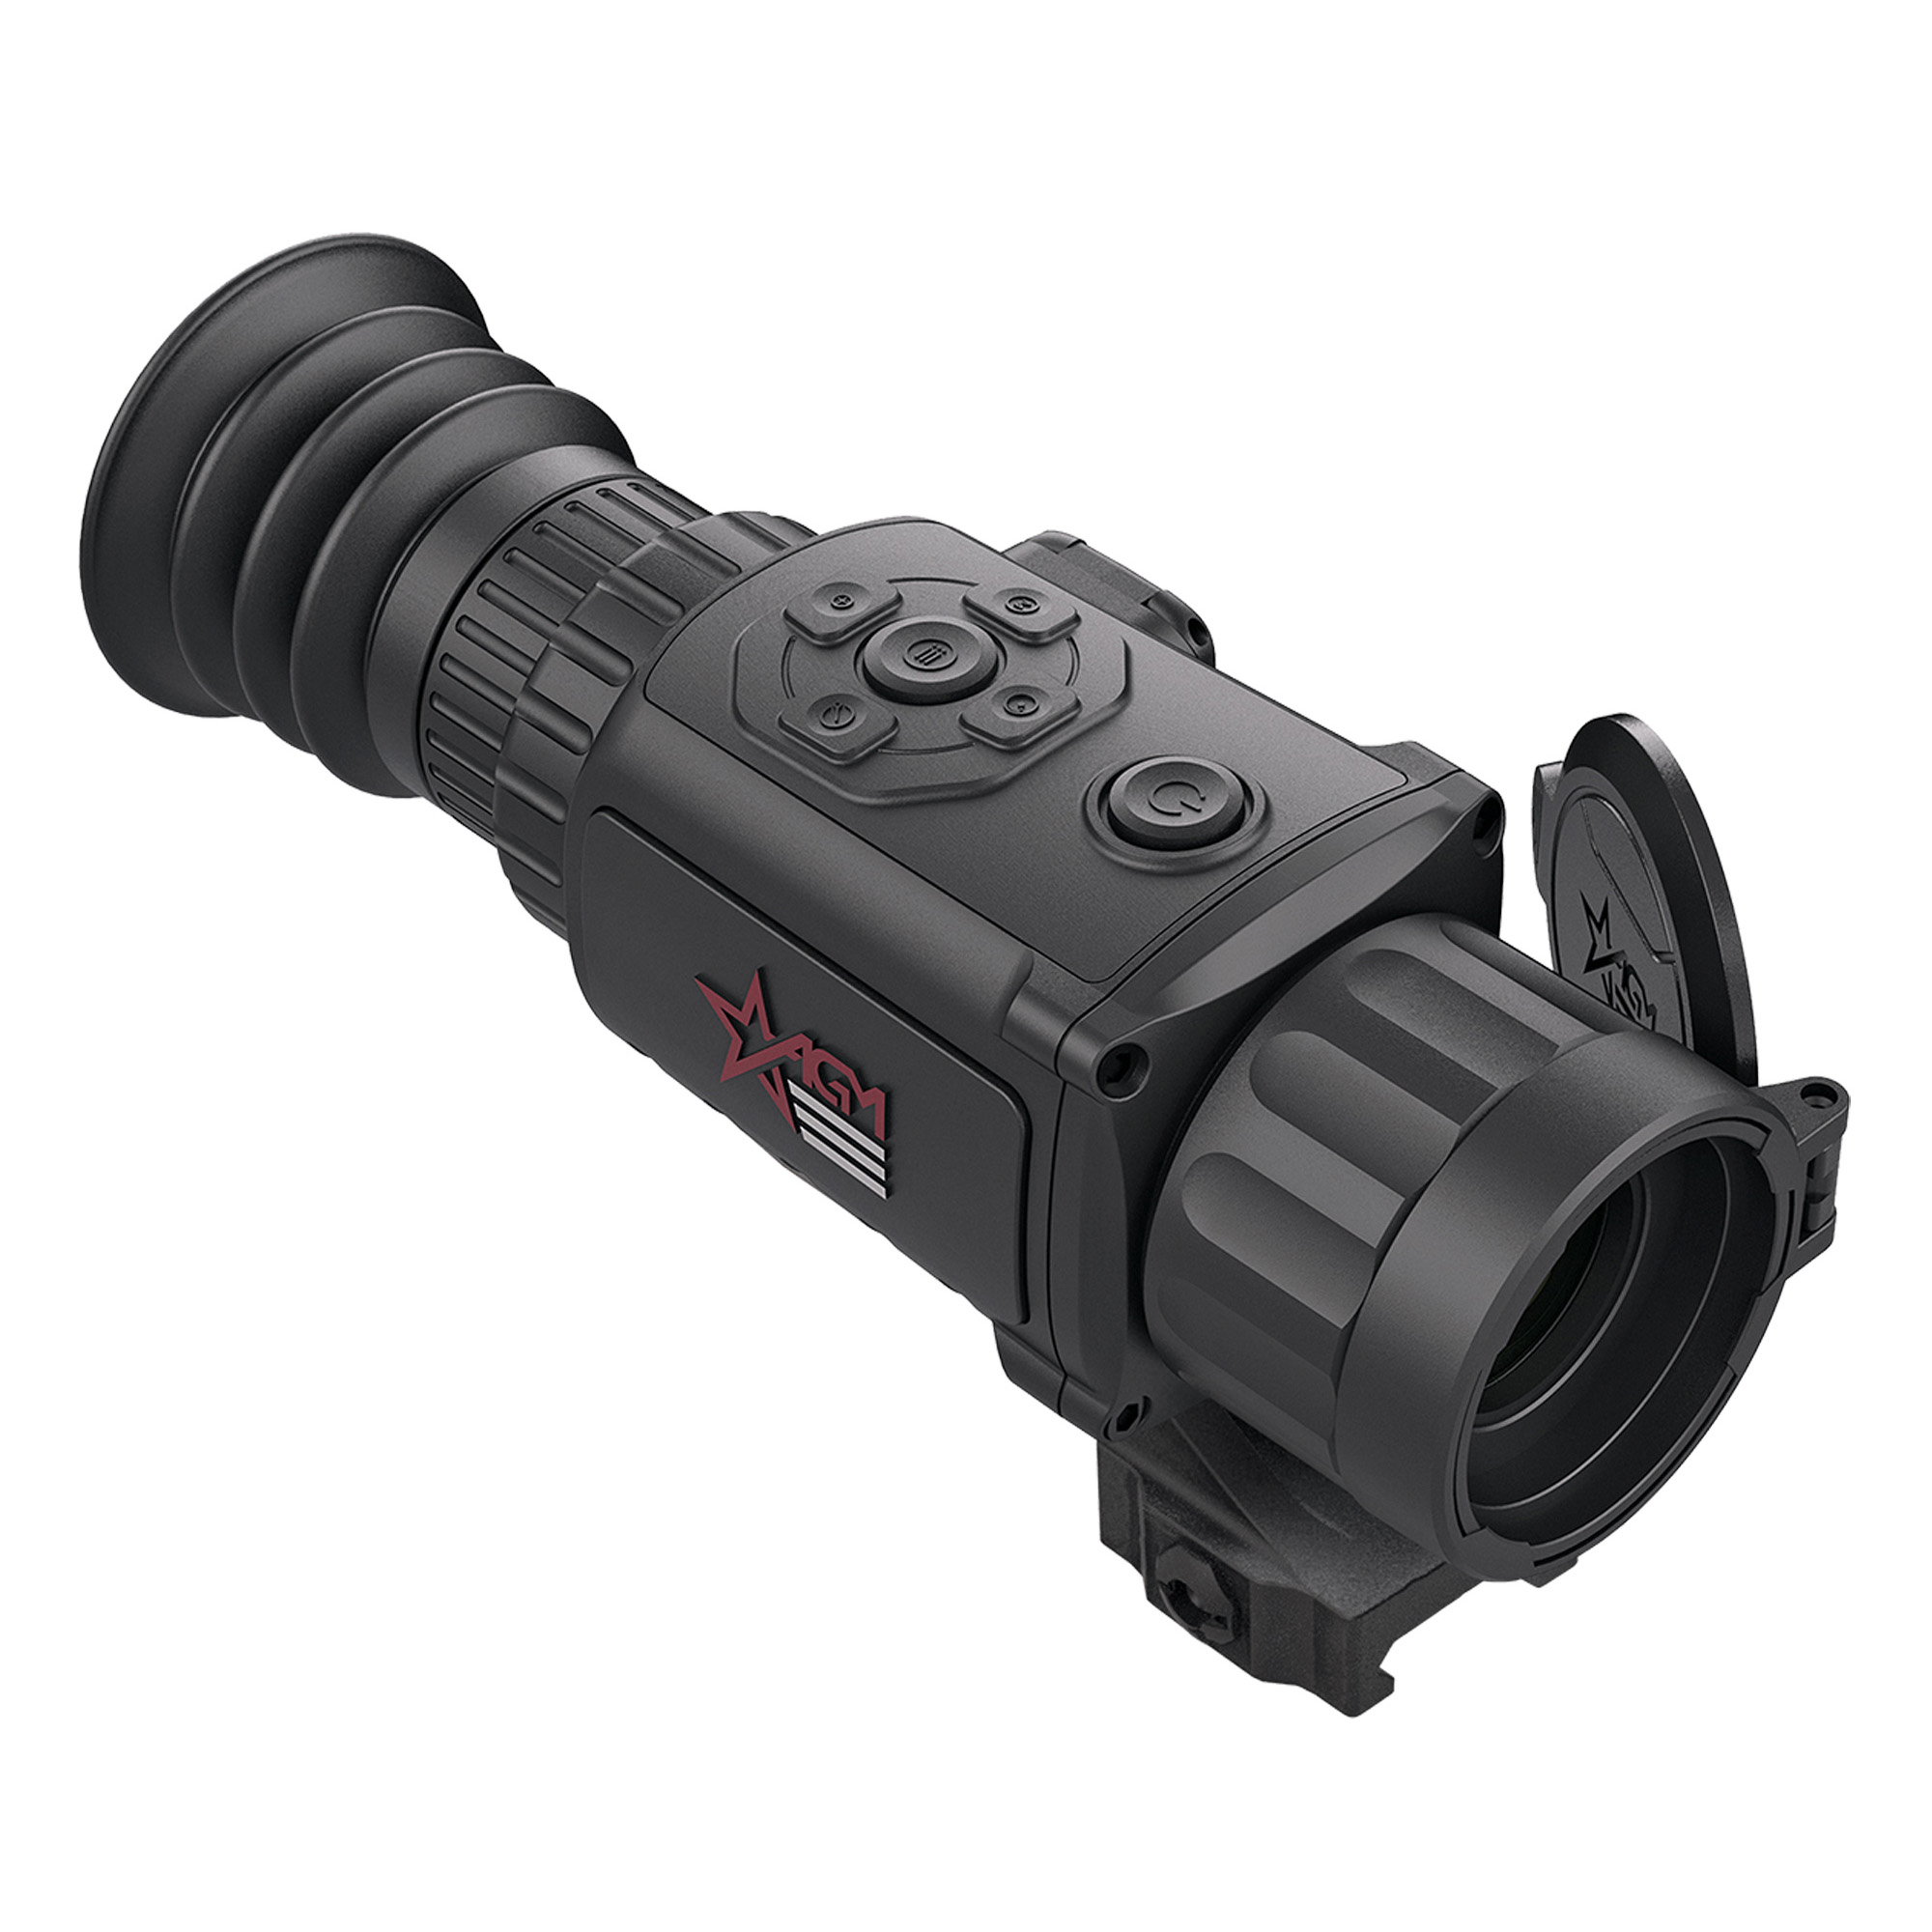 Agm Rattler Ts19-256 Thermal Scope